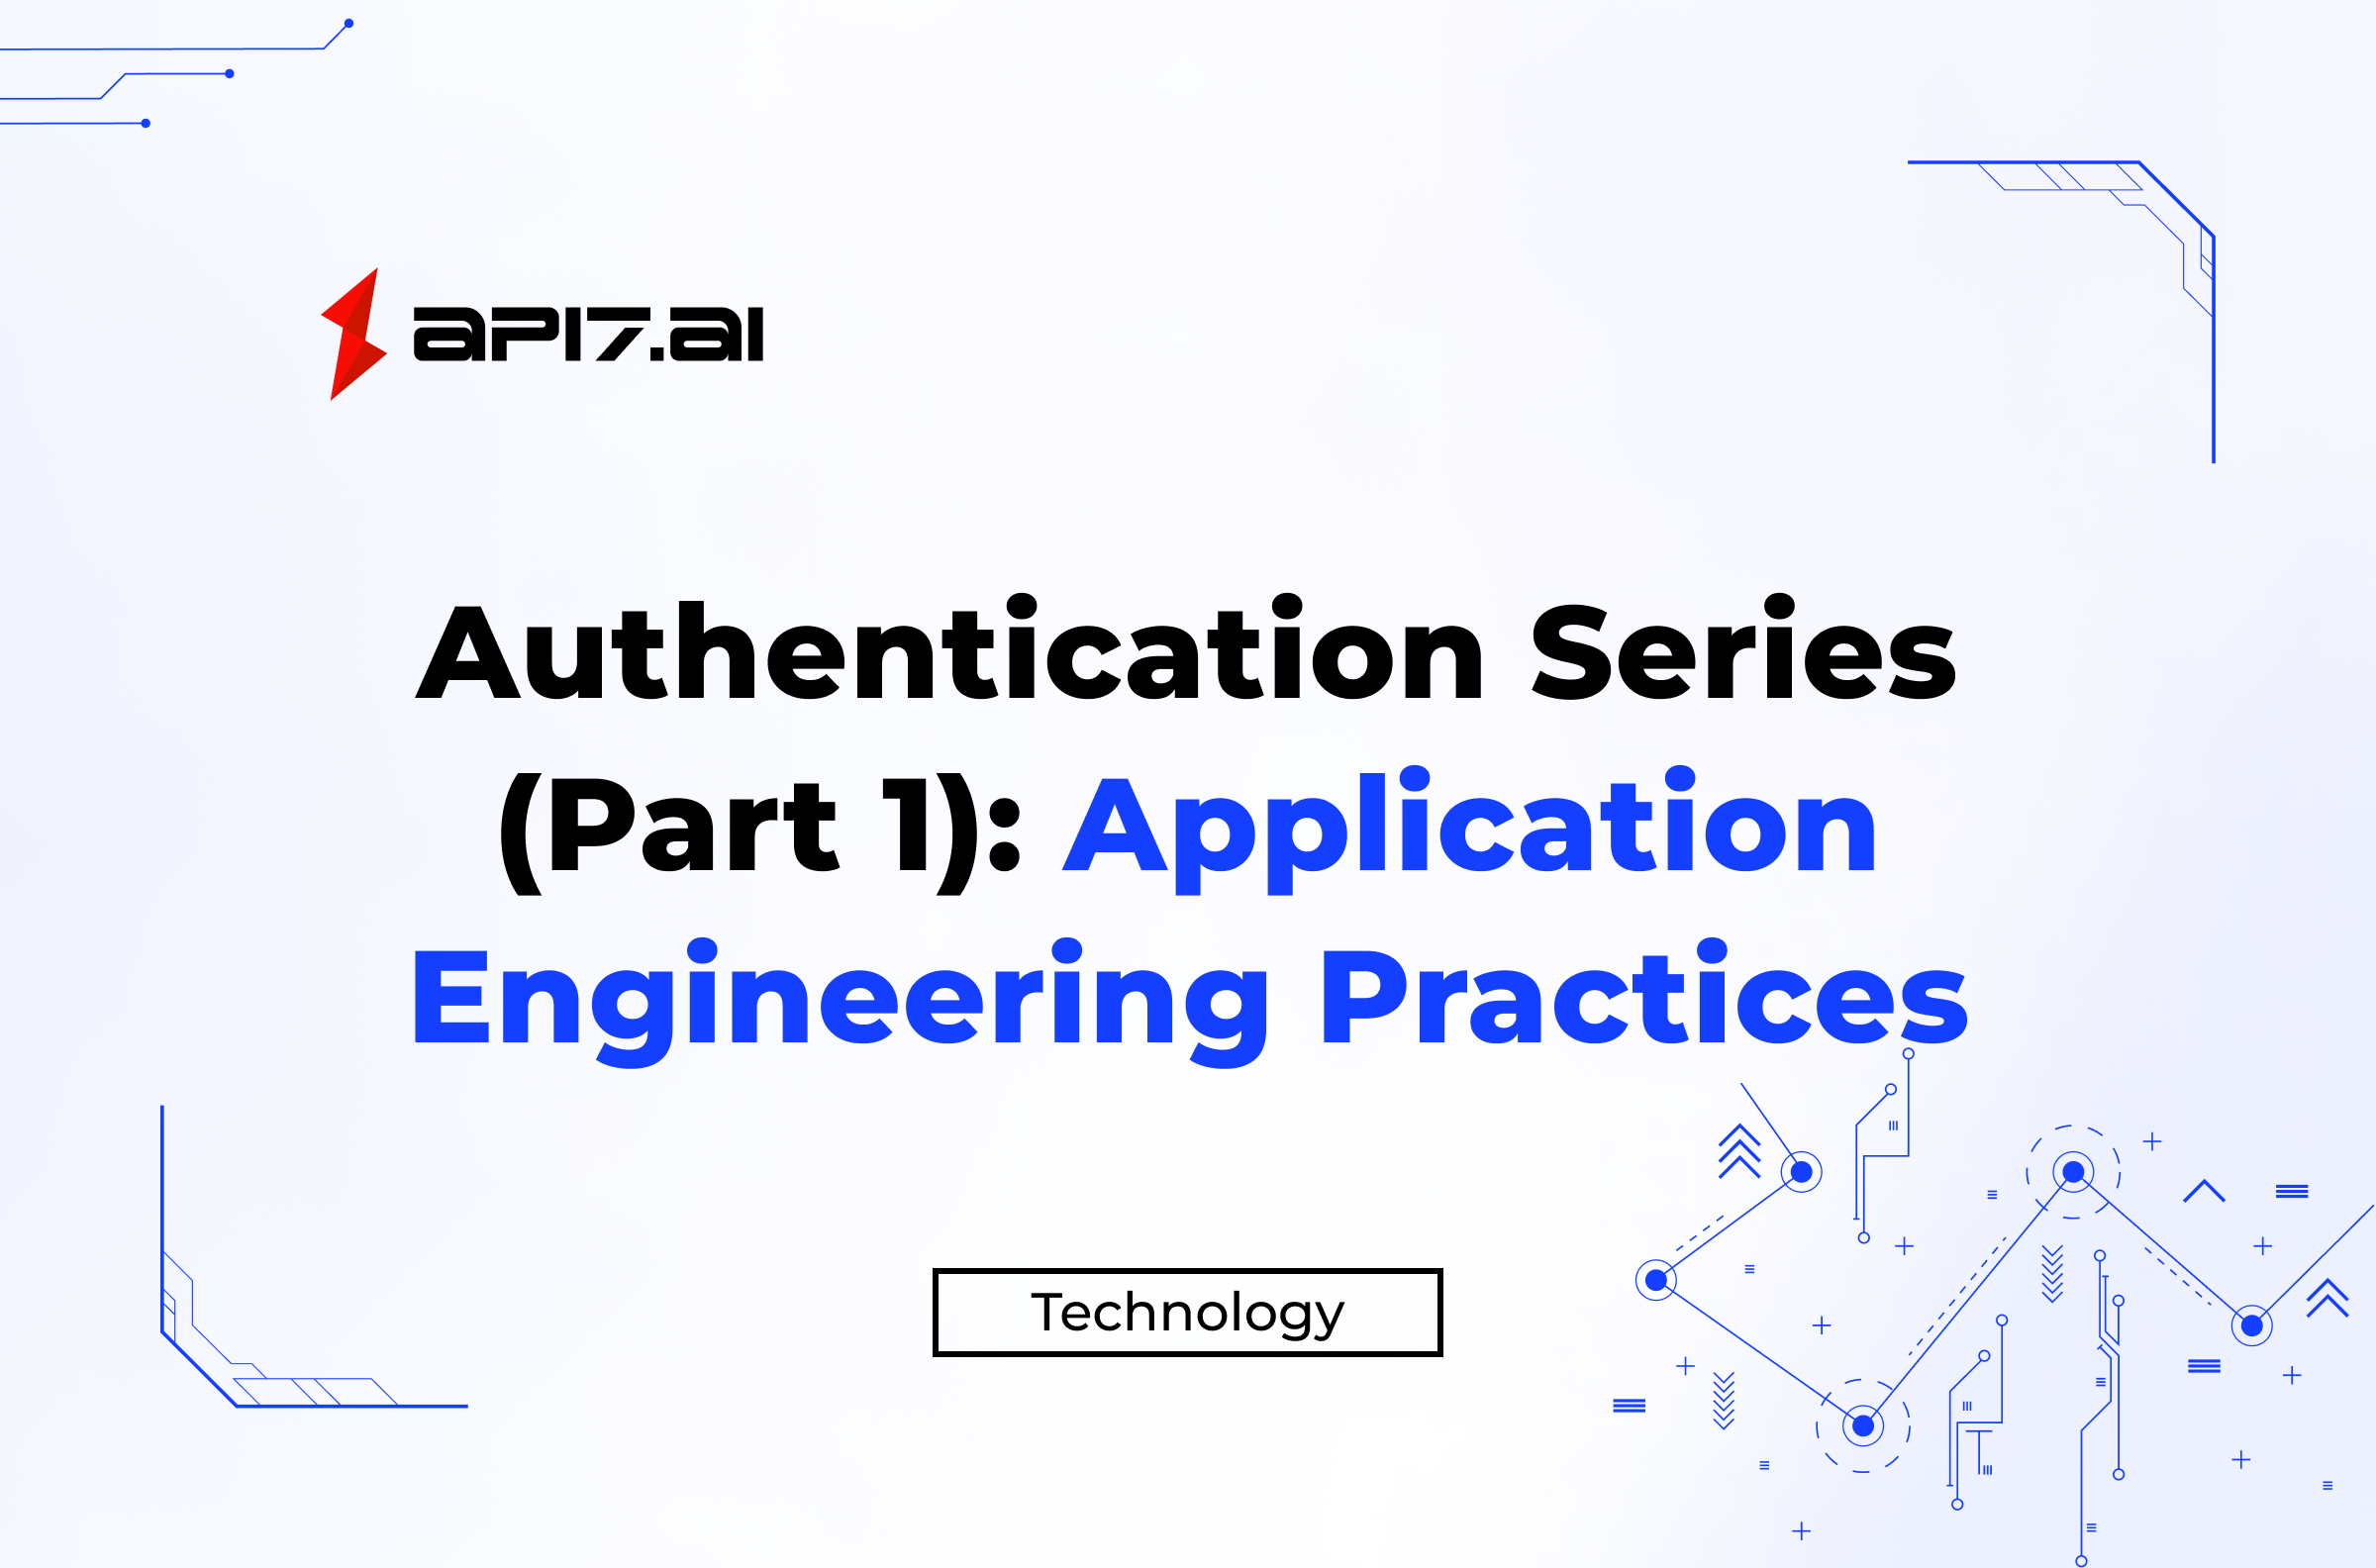 Authentication Series (Part 1): Application Engineering Practices